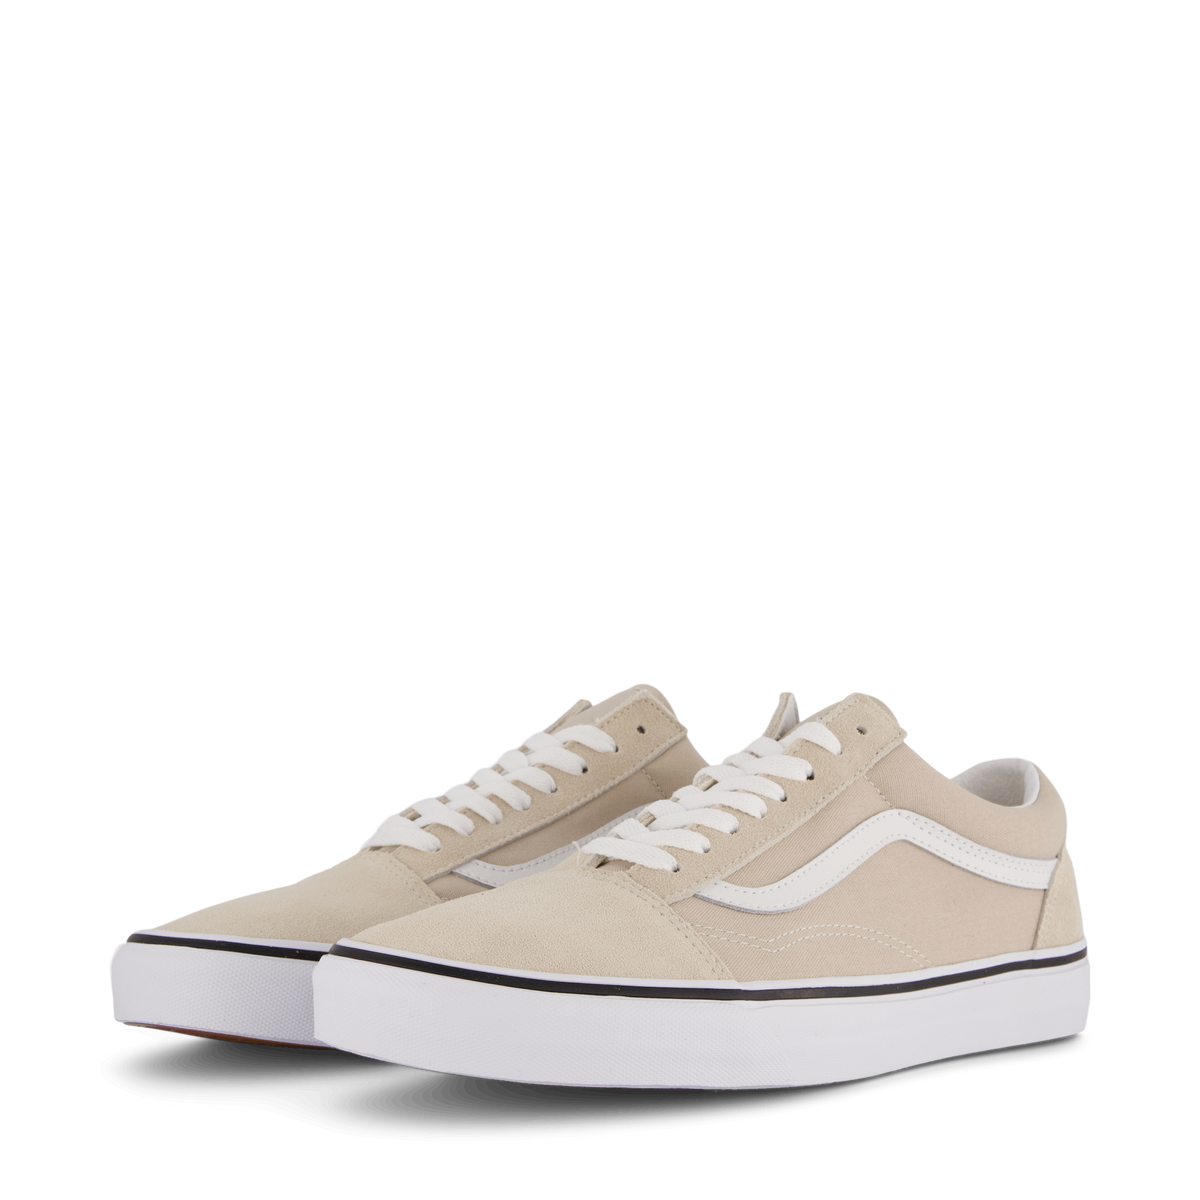 Vans Old Skool Color Theory French Oak